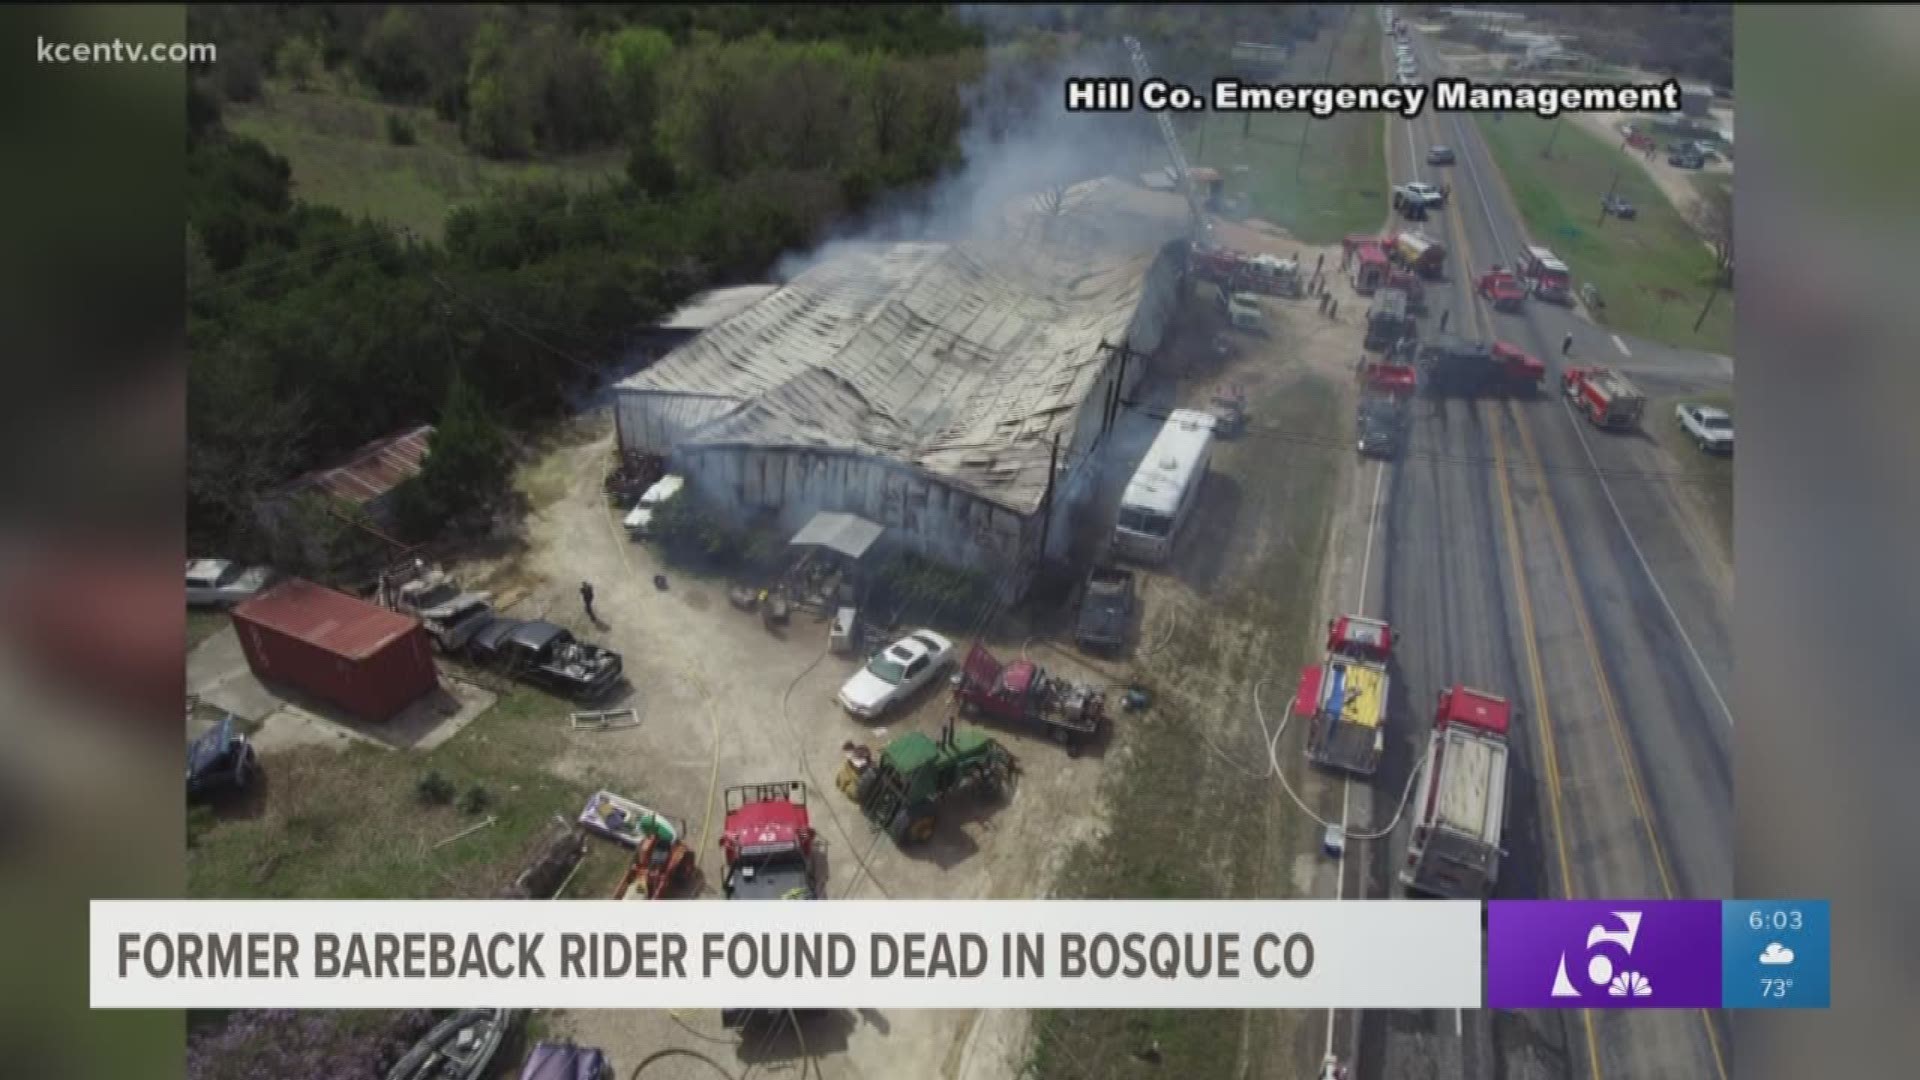 Chris Harris, 41, was found deceased inside the former Salvage Carpet building in Bosque County.